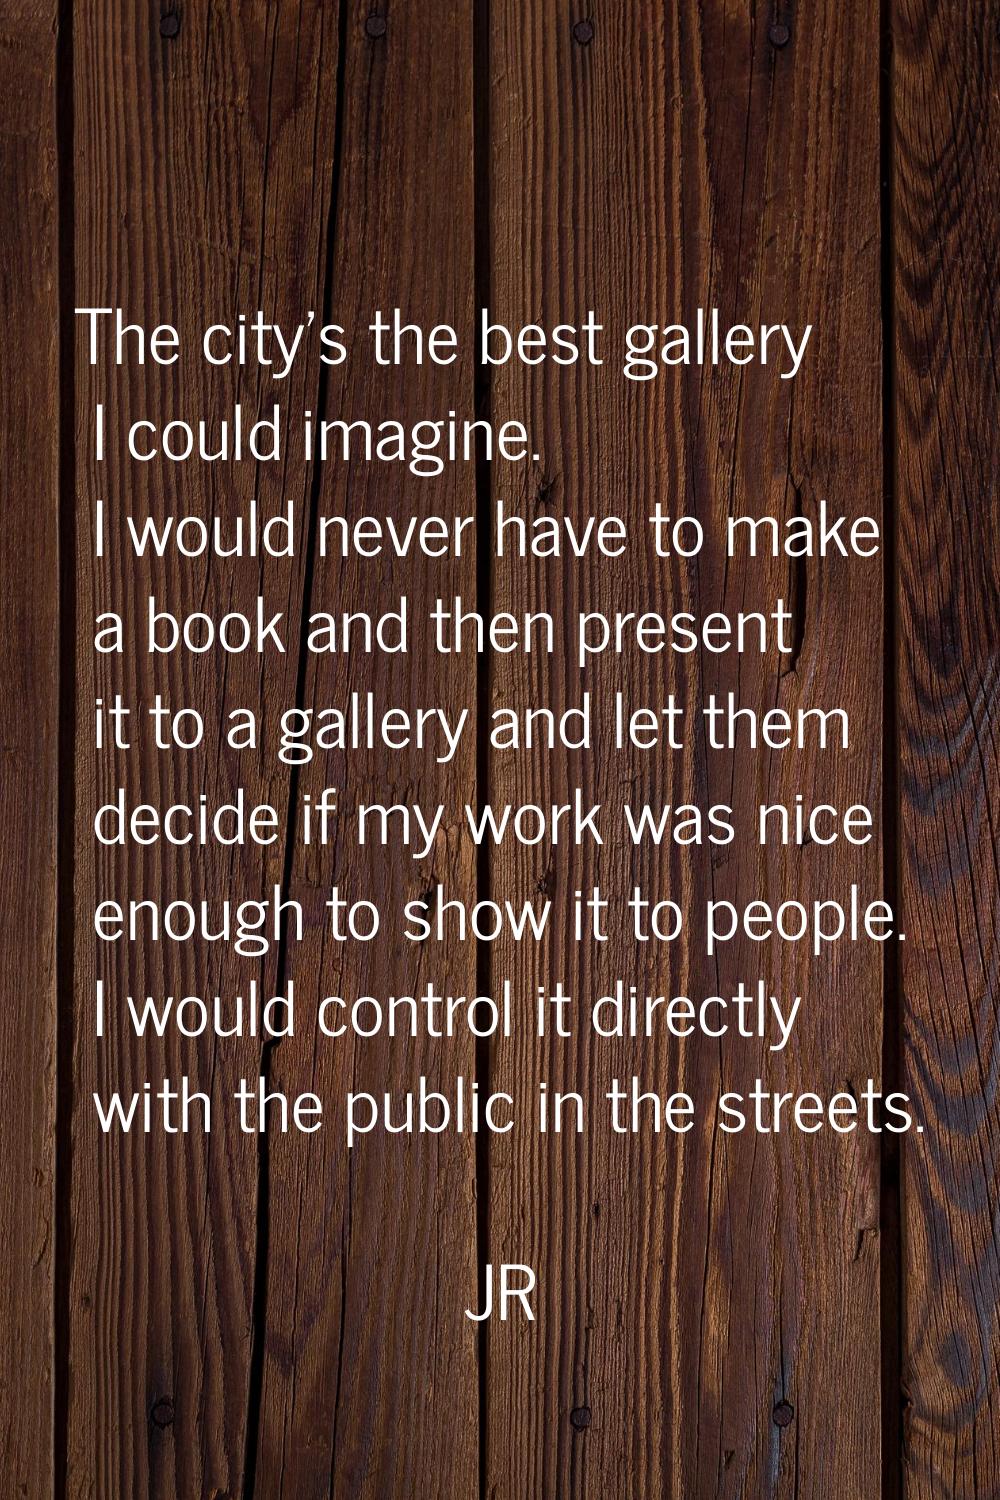 The city's the best gallery I could imagine. I would never have to make a book and then present it 